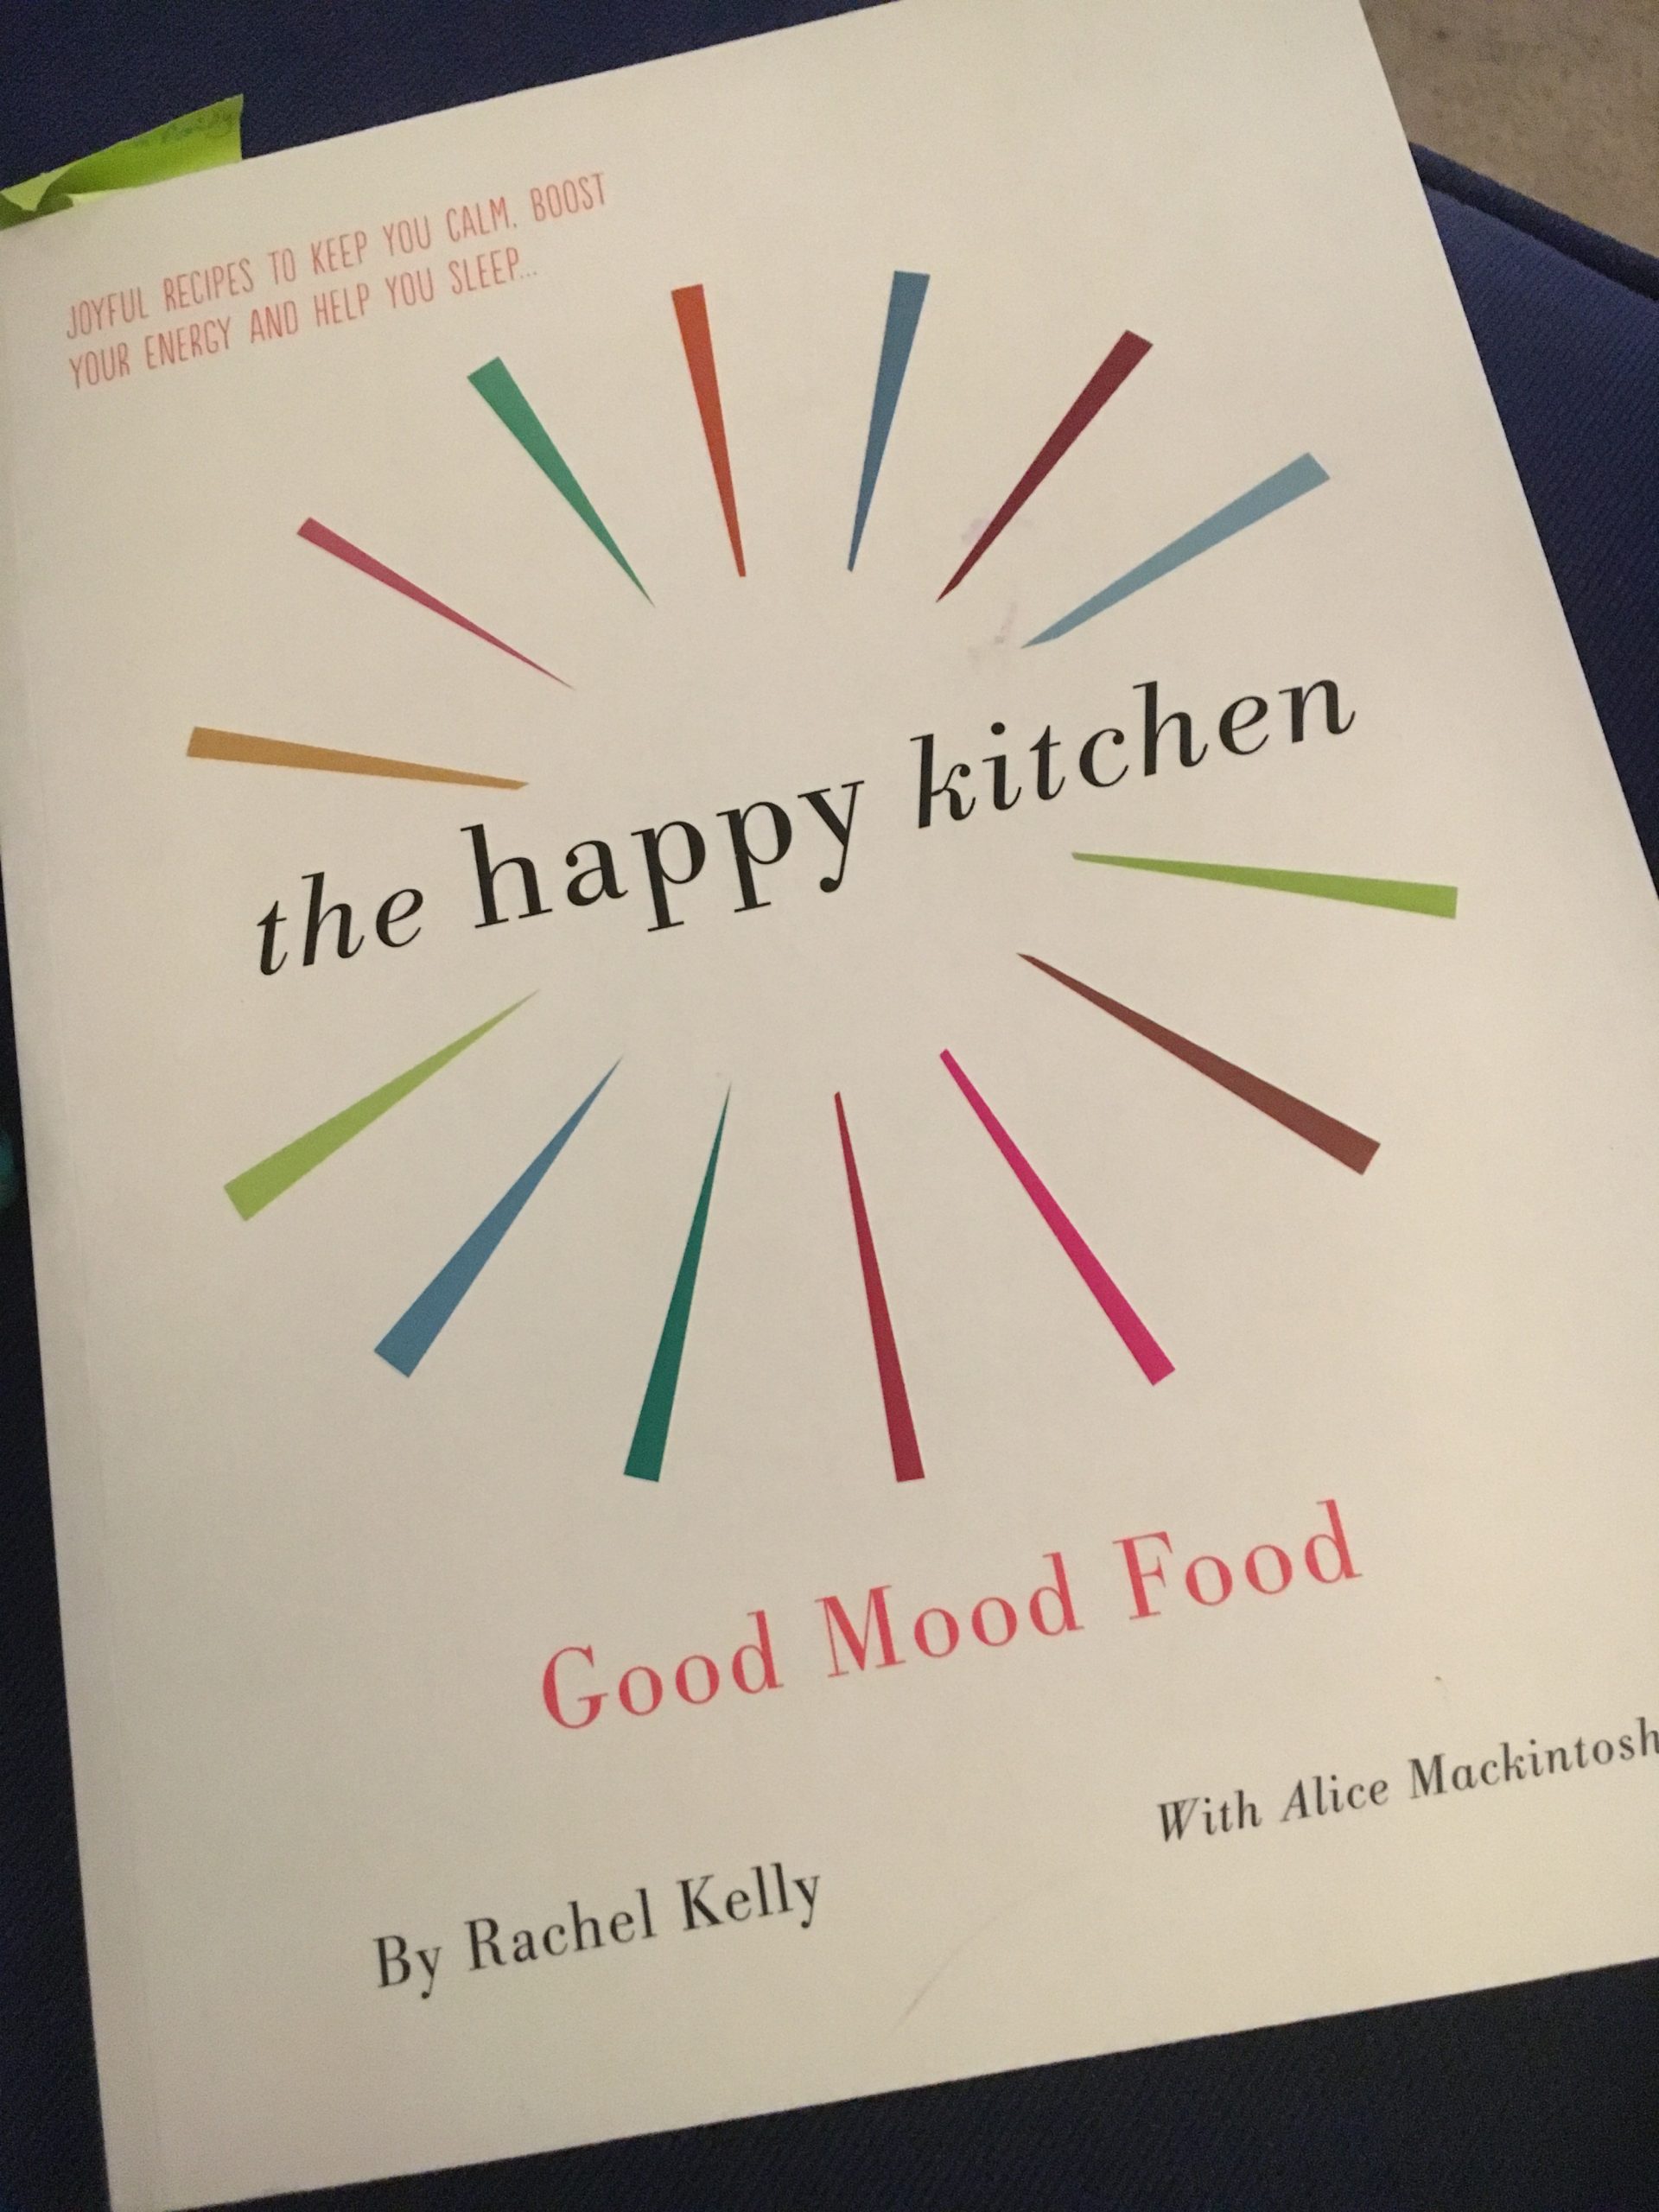 The Happy Kitchen in Book Club.